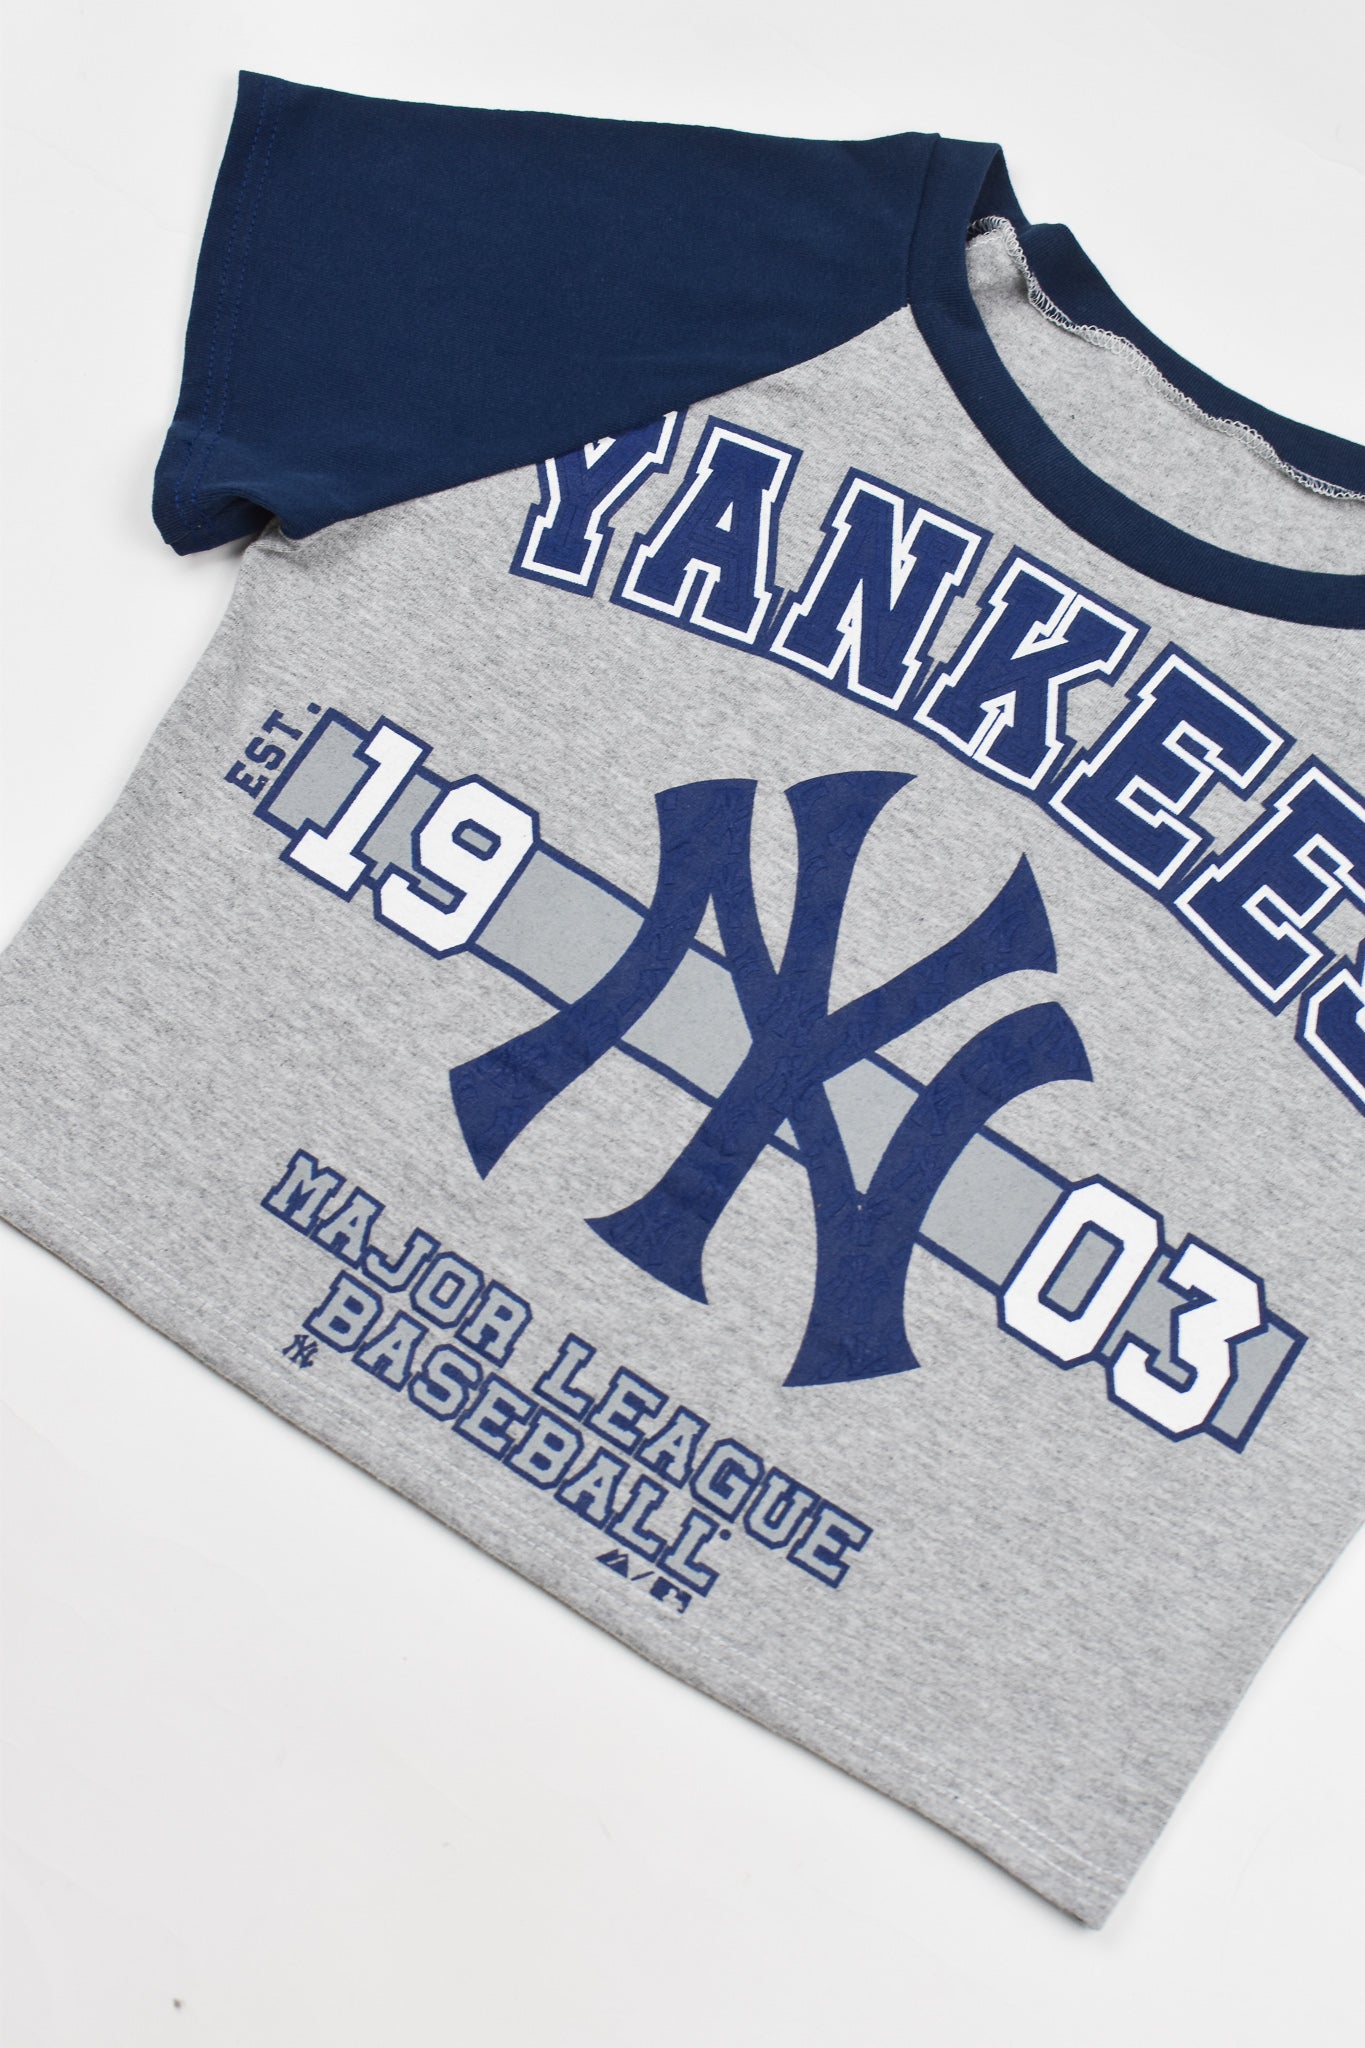 Upcycled Yankees Baby Tee - Tonguetied Apparel